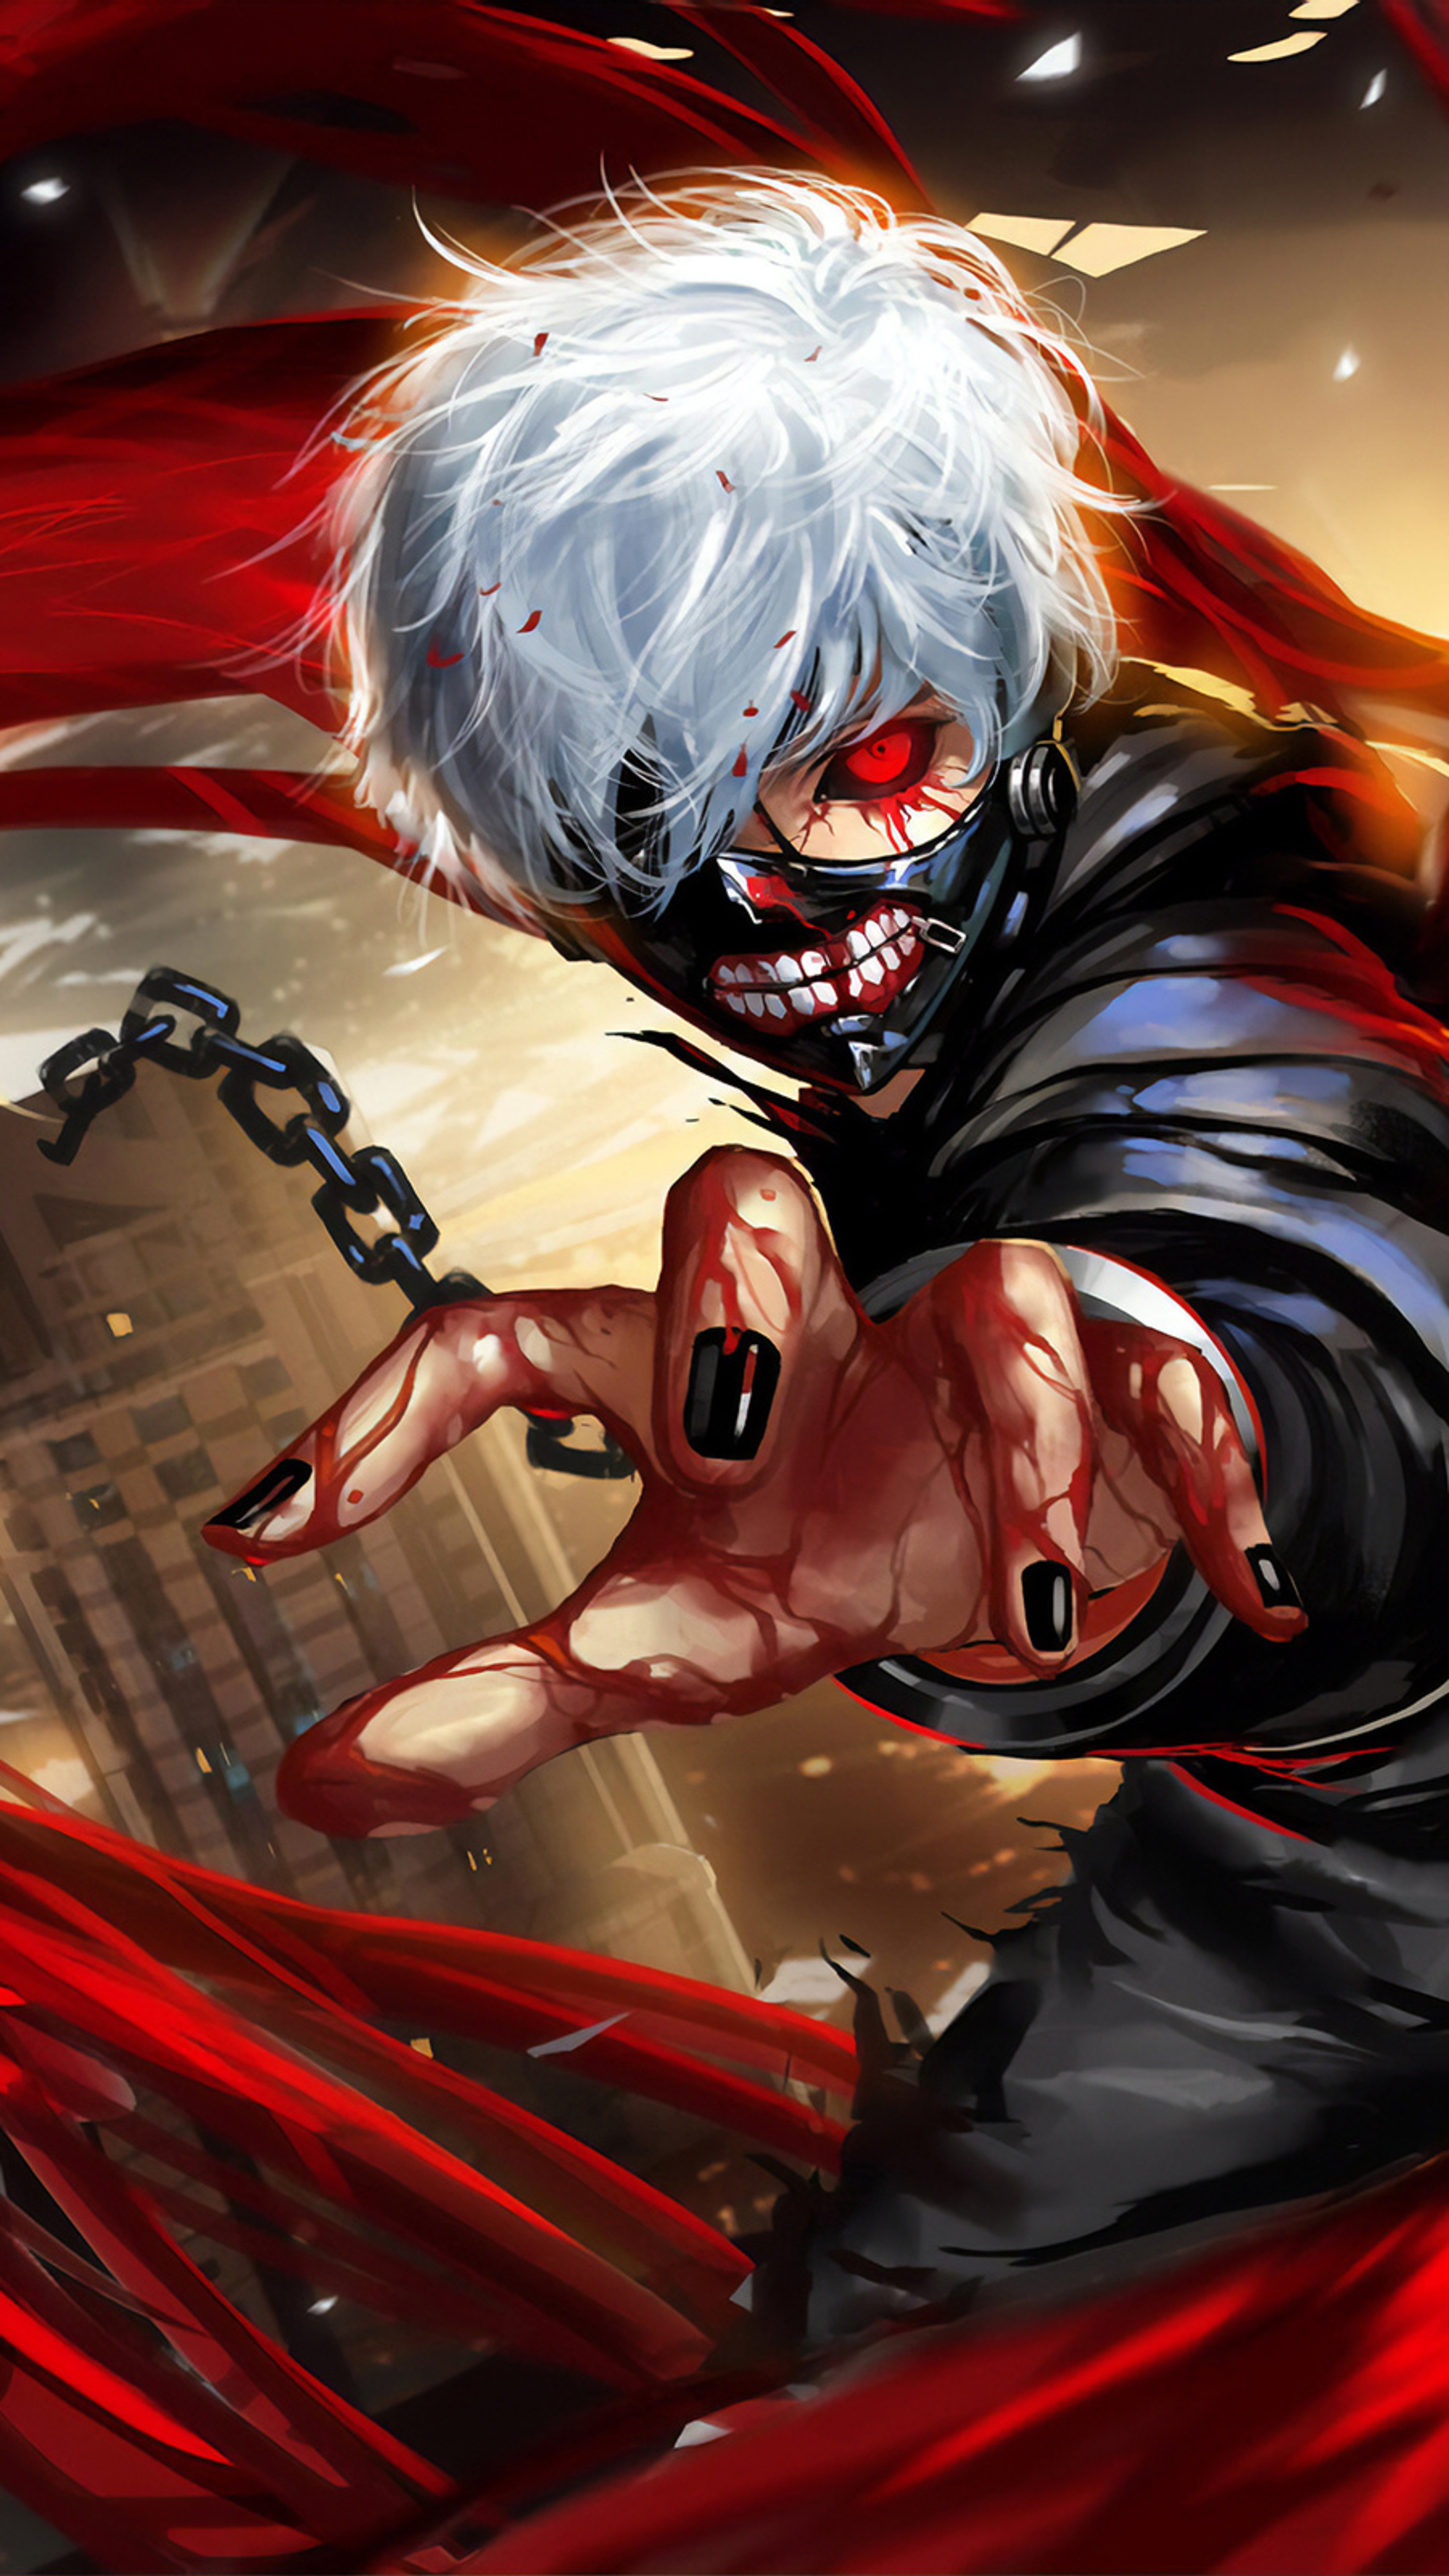 Tokyo Ghoul anime, Fanart wallpapers, Sony Xperia devices, Artistic expressions, 2160x3840 4K Phone